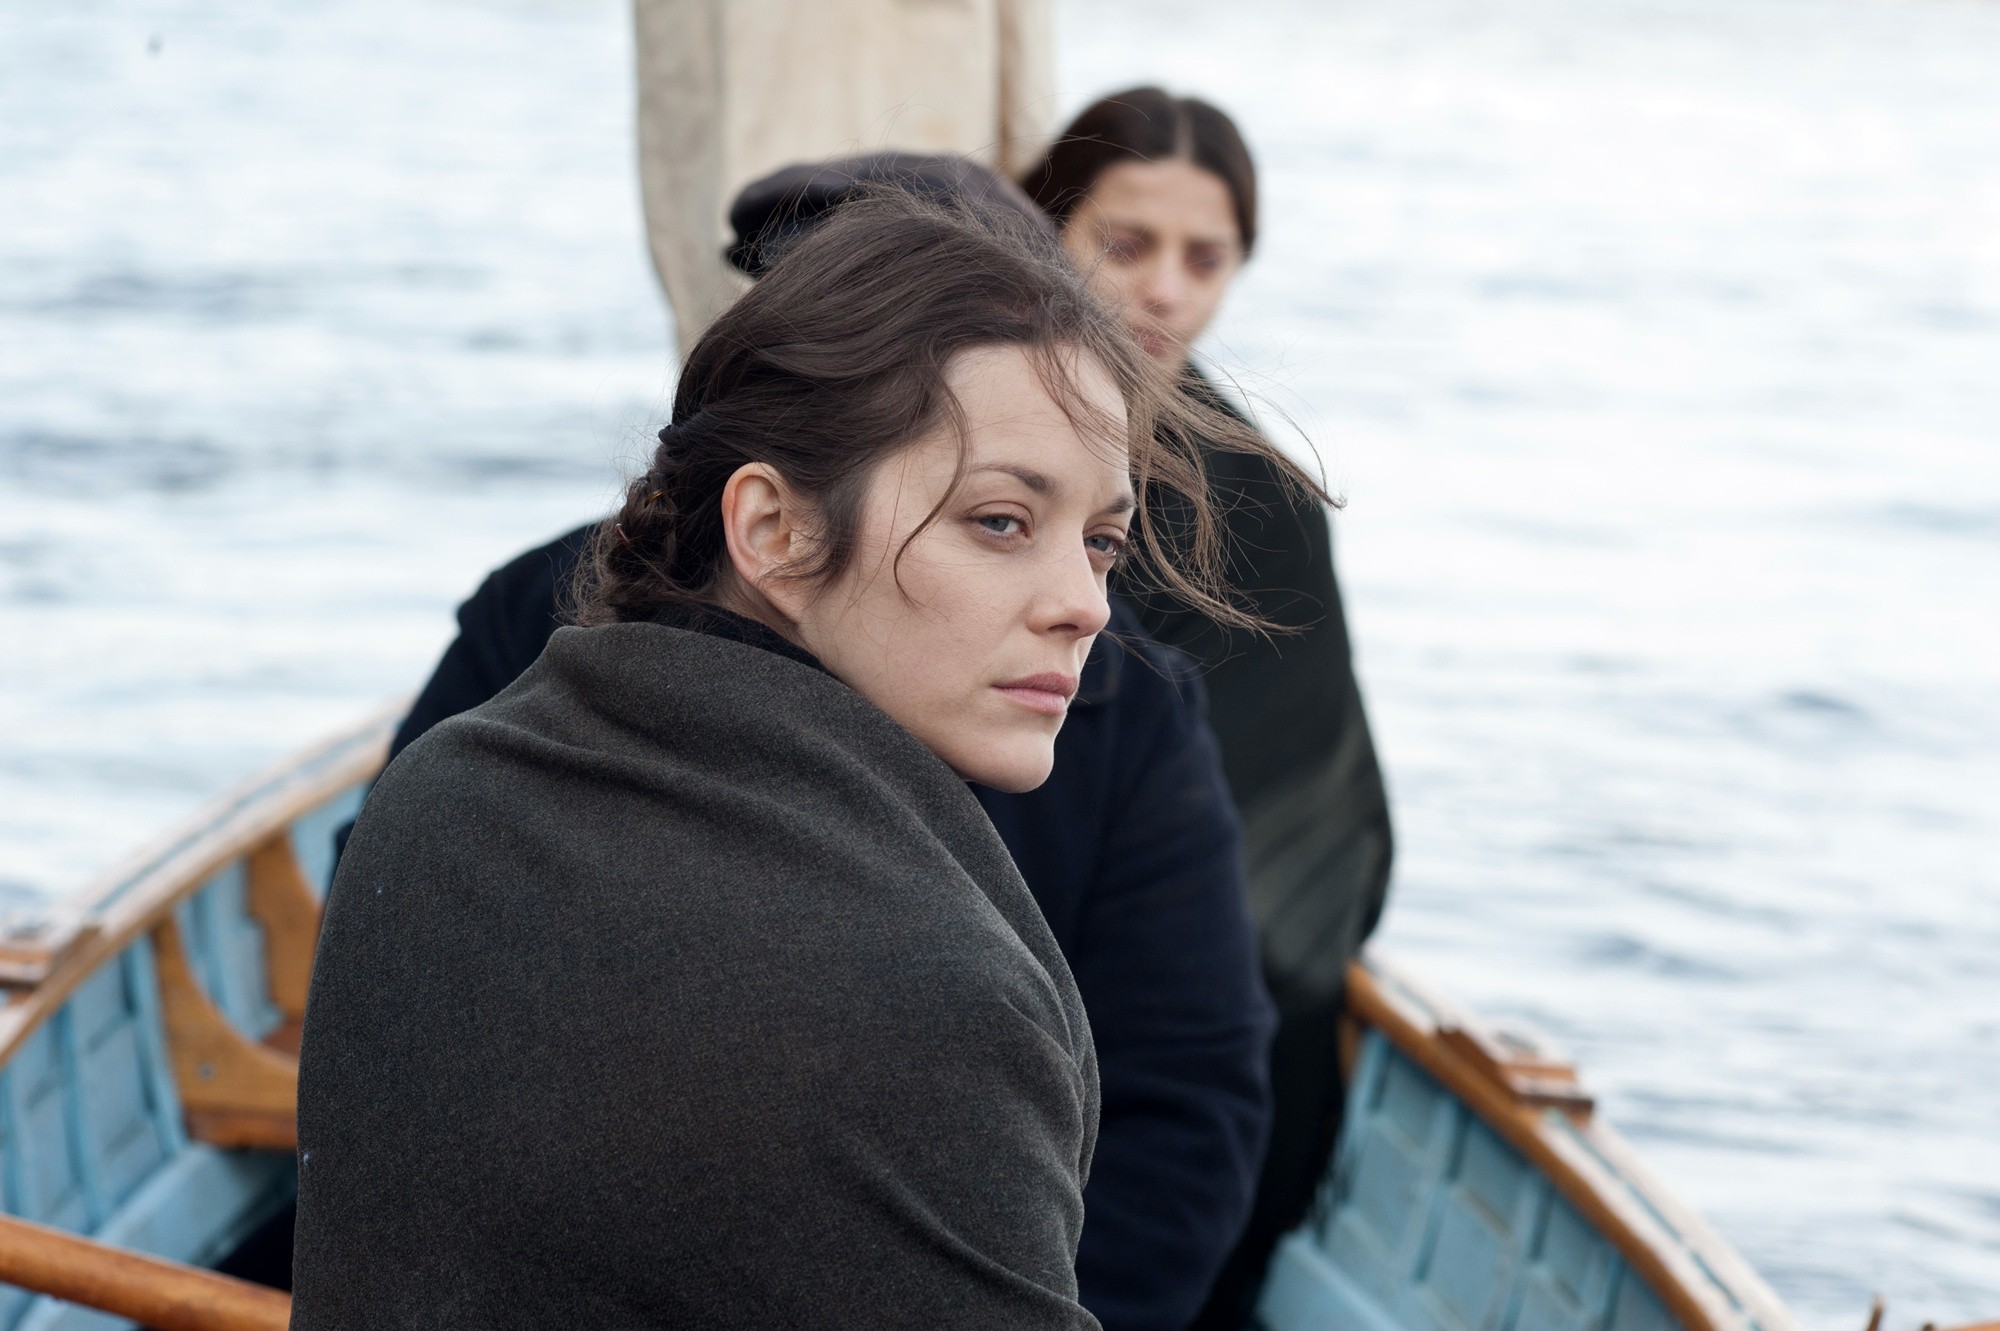 Marion Cotillard in The Weinstein Company's The Immigrant (2014)